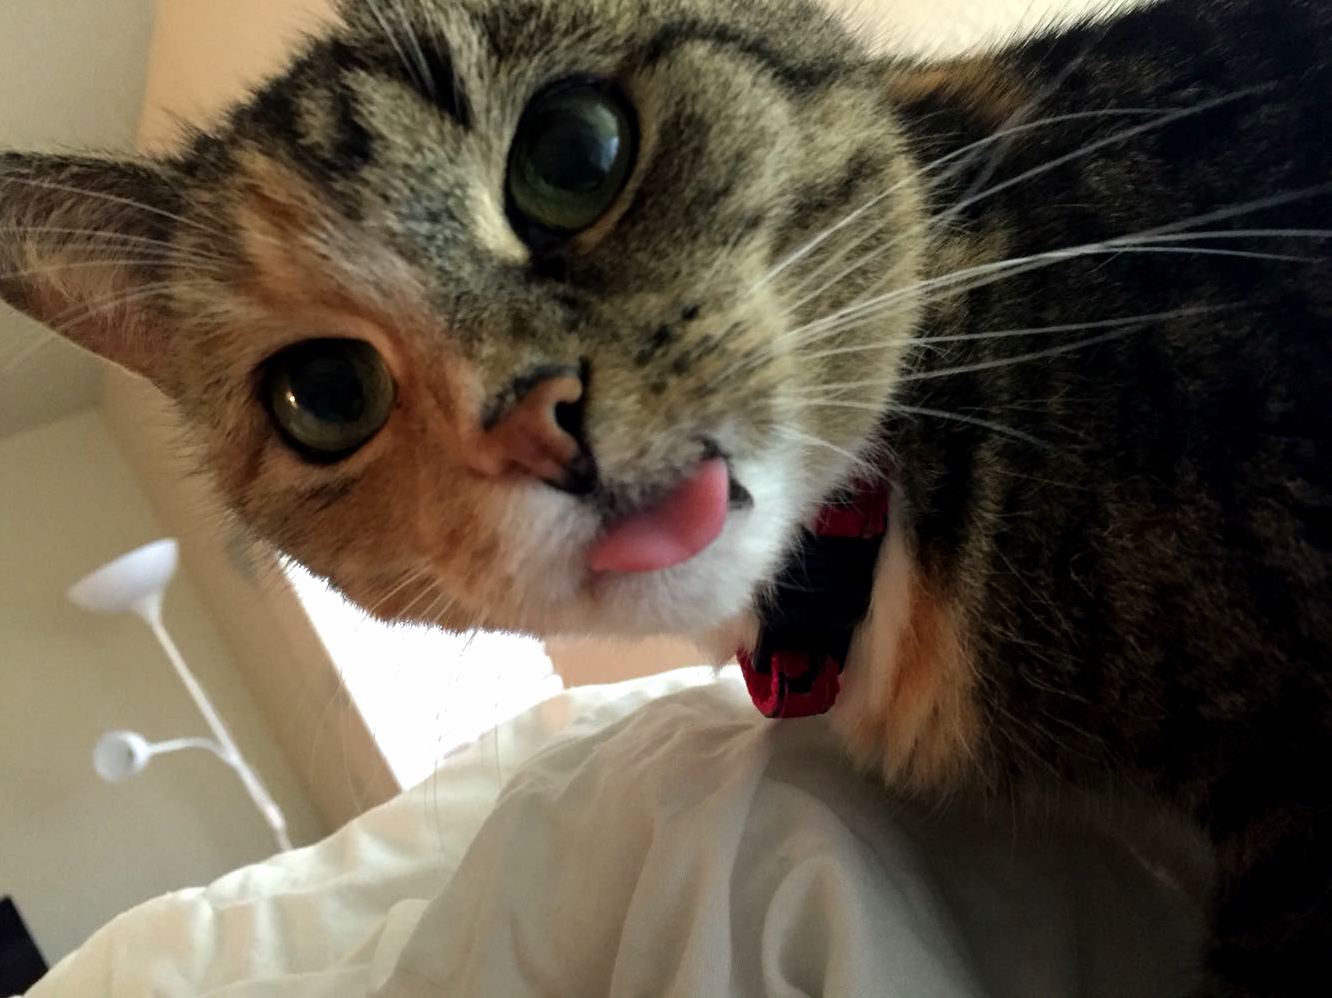 Does anyone elses cat stick their tongue out